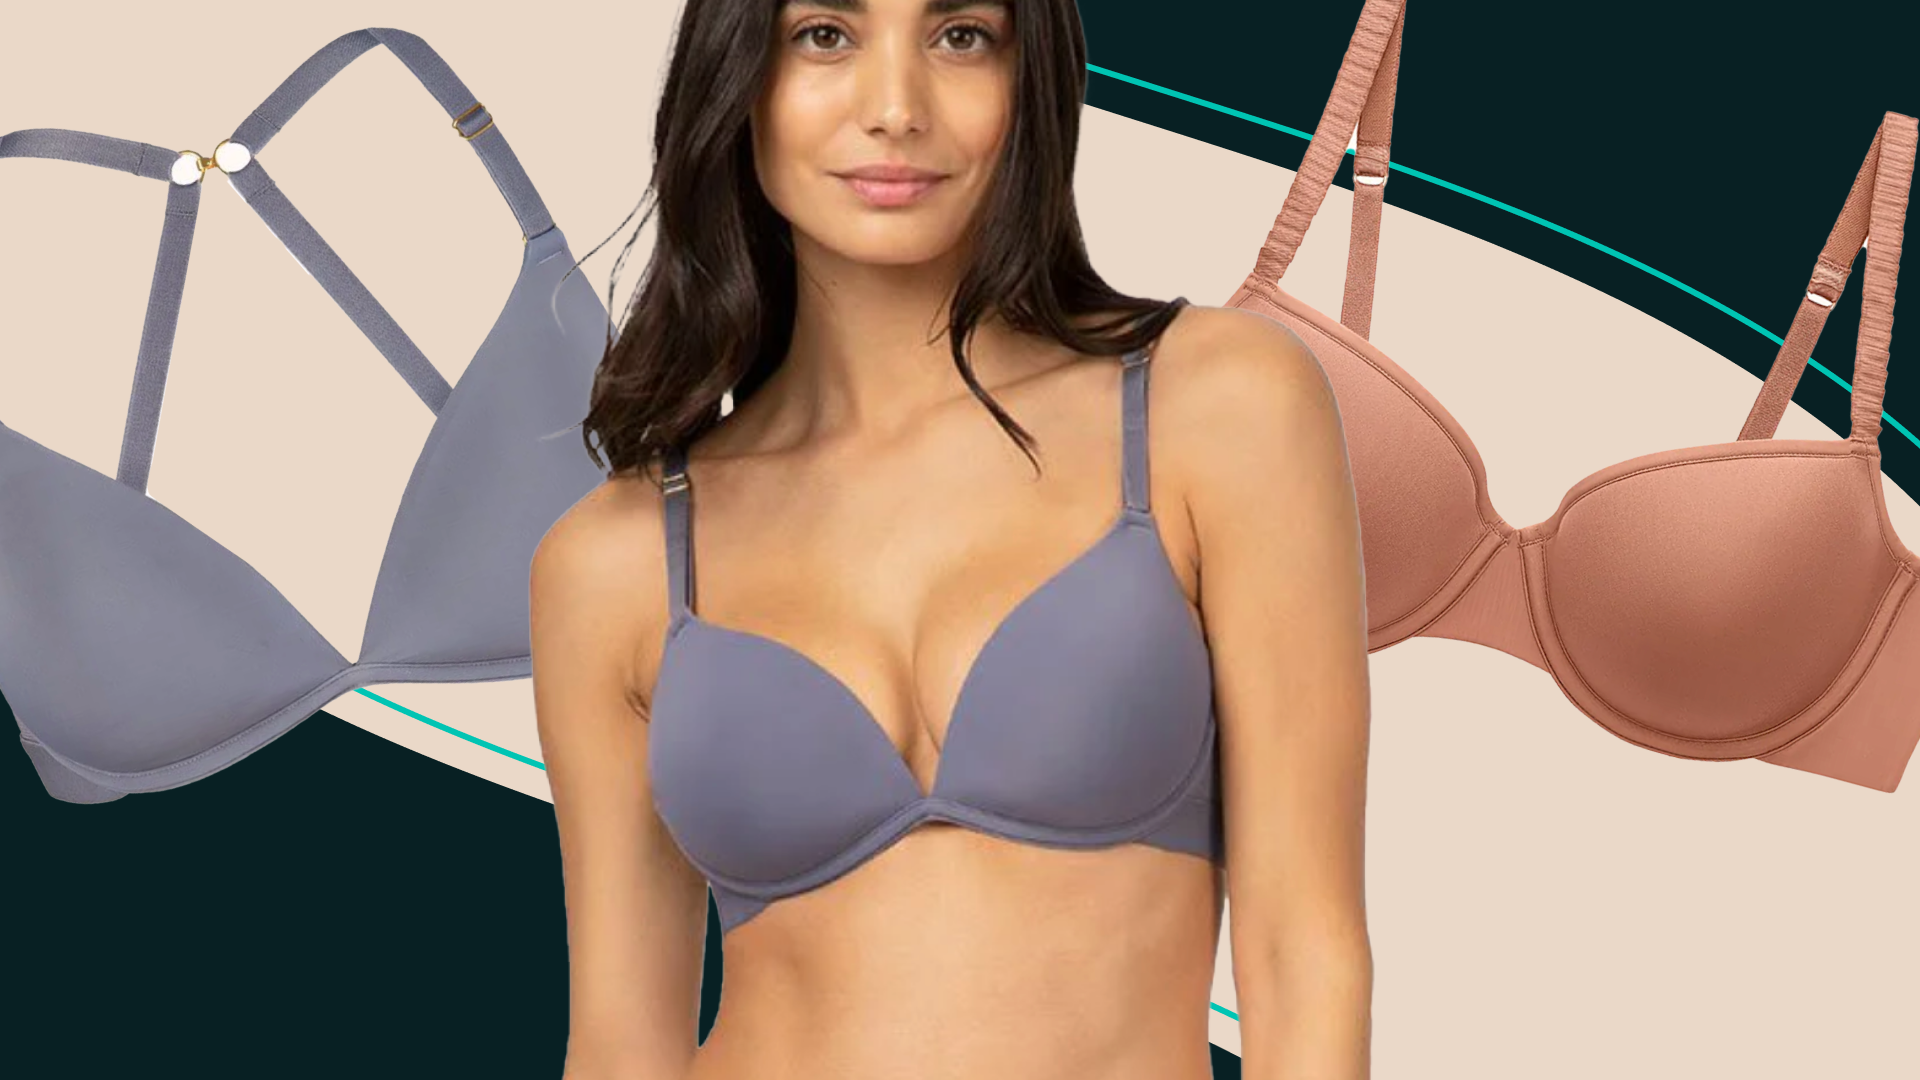 Thousands of  Shoppers Are Sold on This Wireless Bra